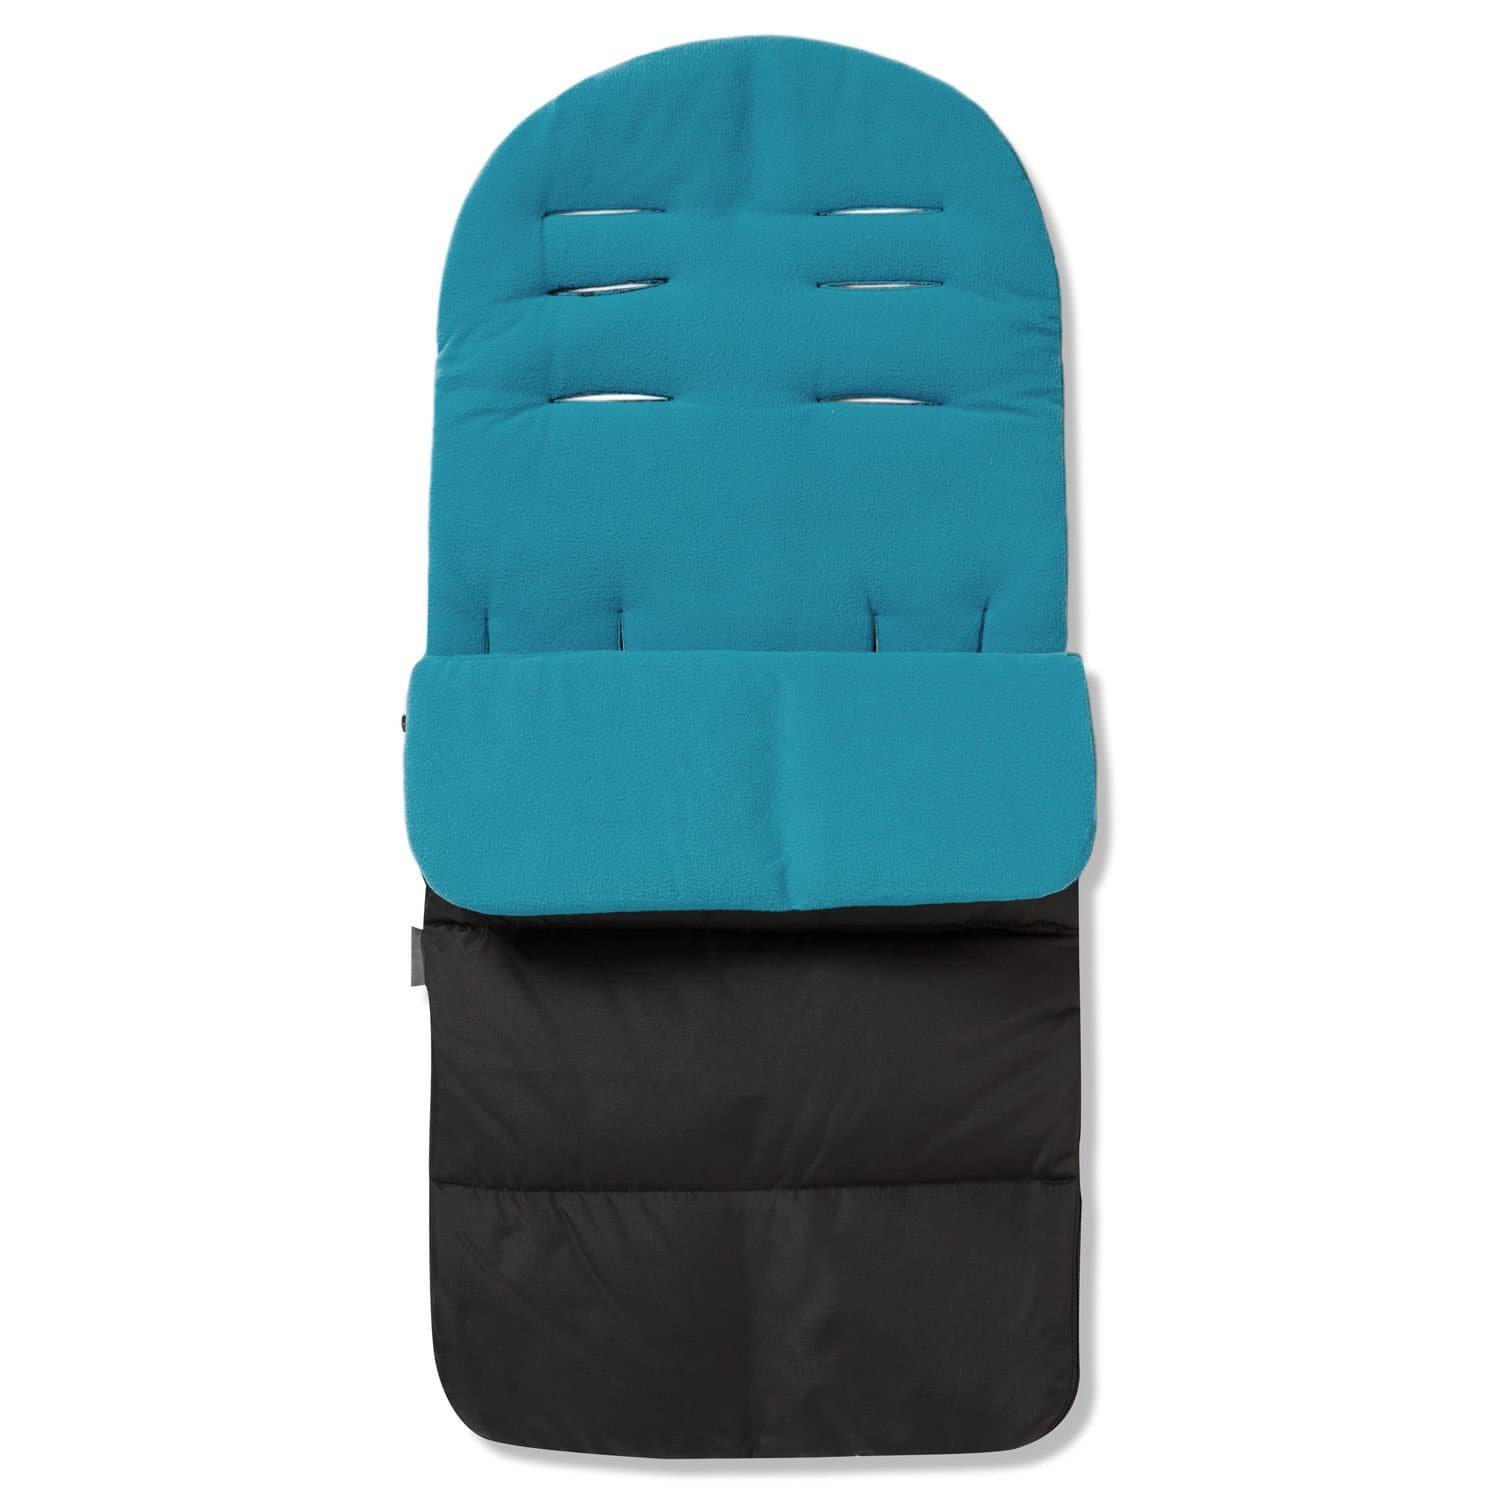 Premium Footmuff / Cosy Toes Compatible with Mothercare - Ocean Blue / Fits All Models | For Your Little One